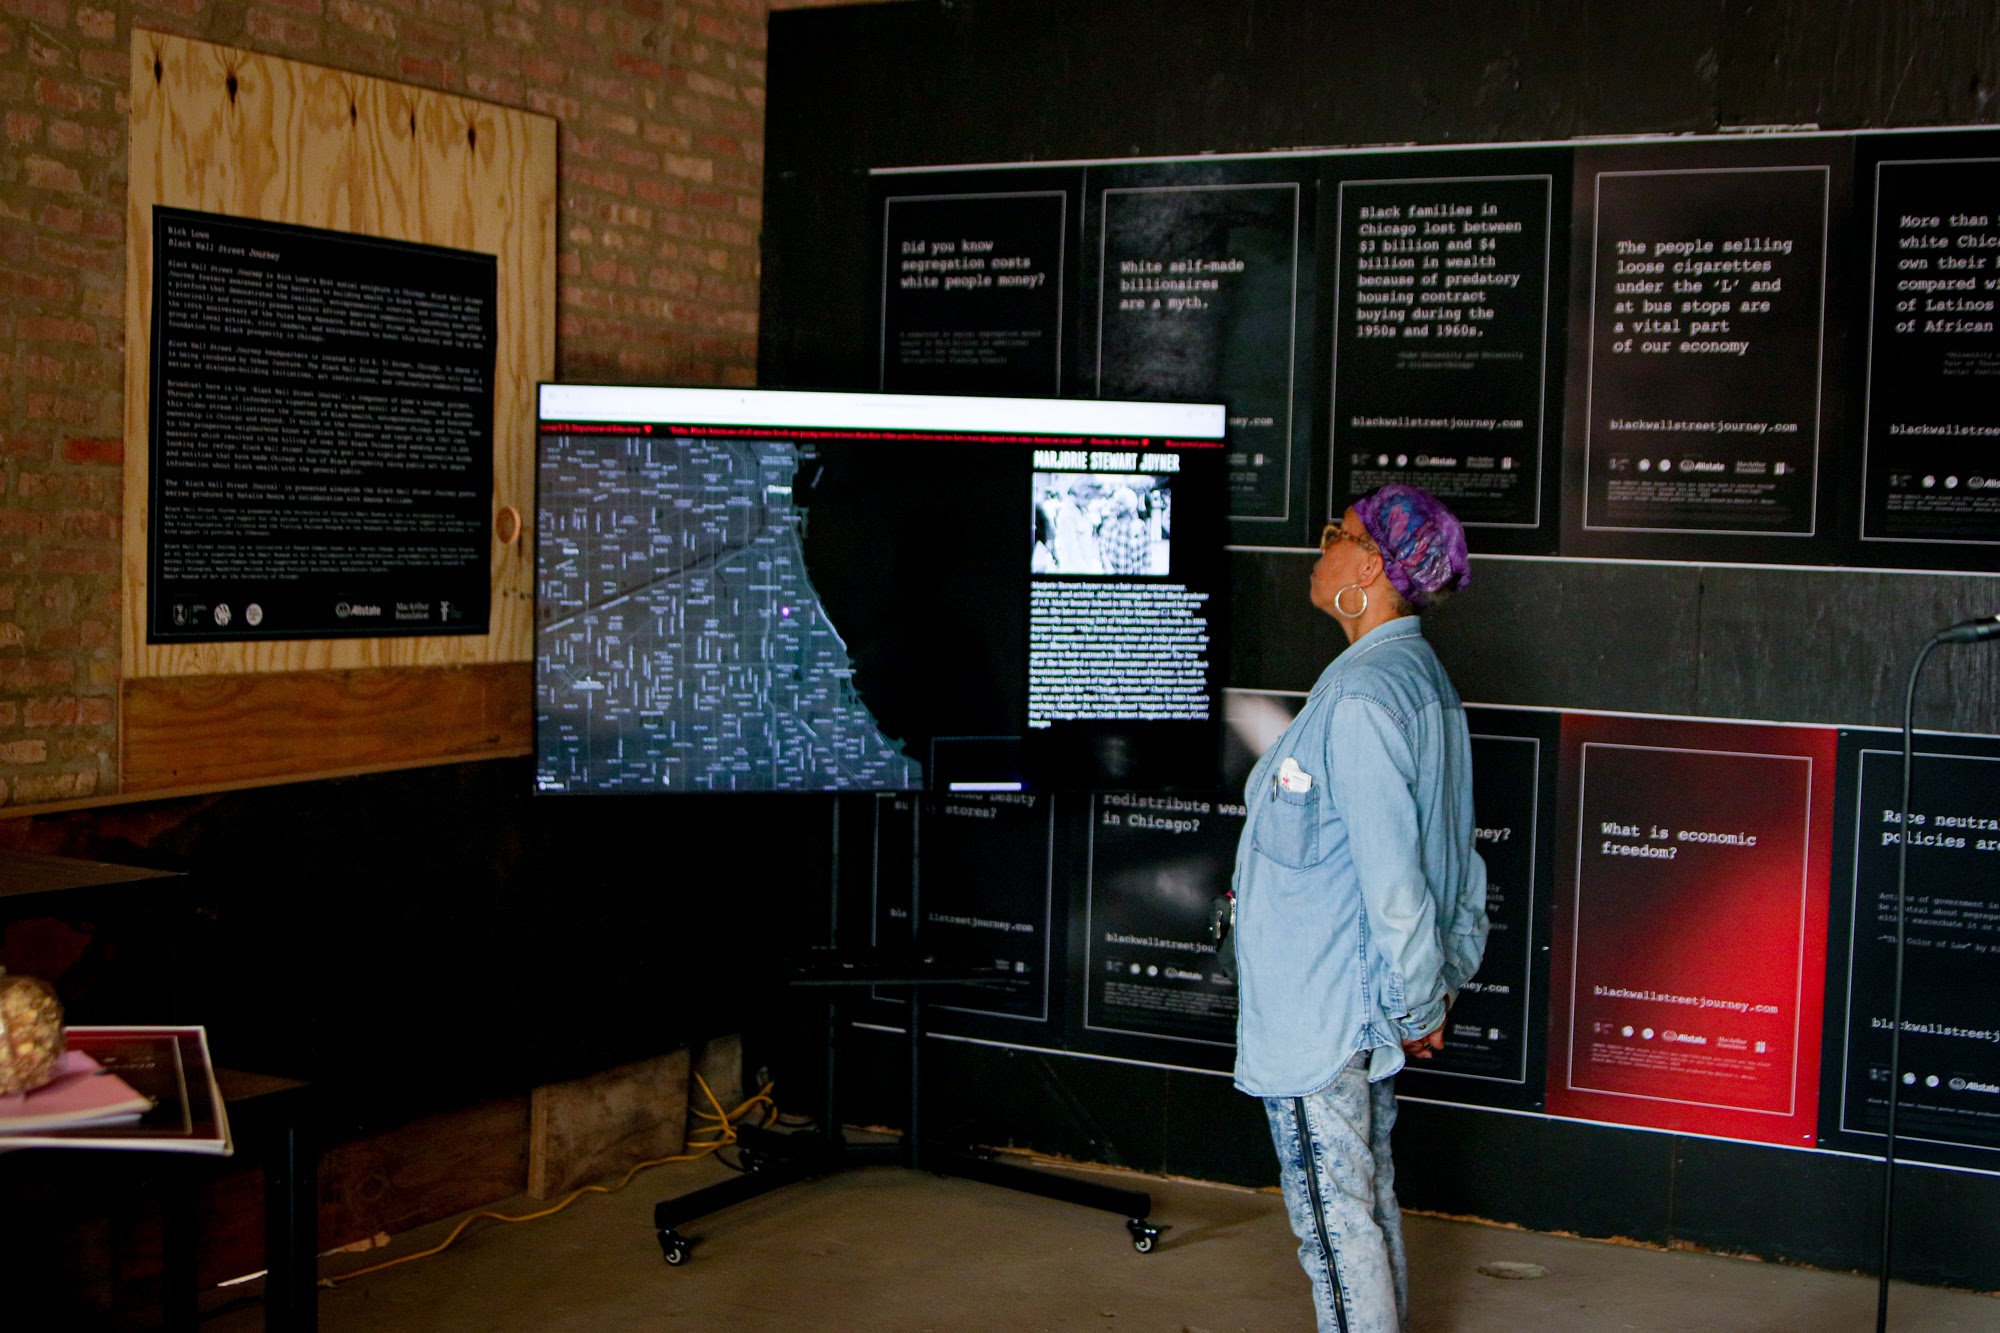 A woman in denim watches a TV monitor mounted in from of posters in a gallery exhibition.